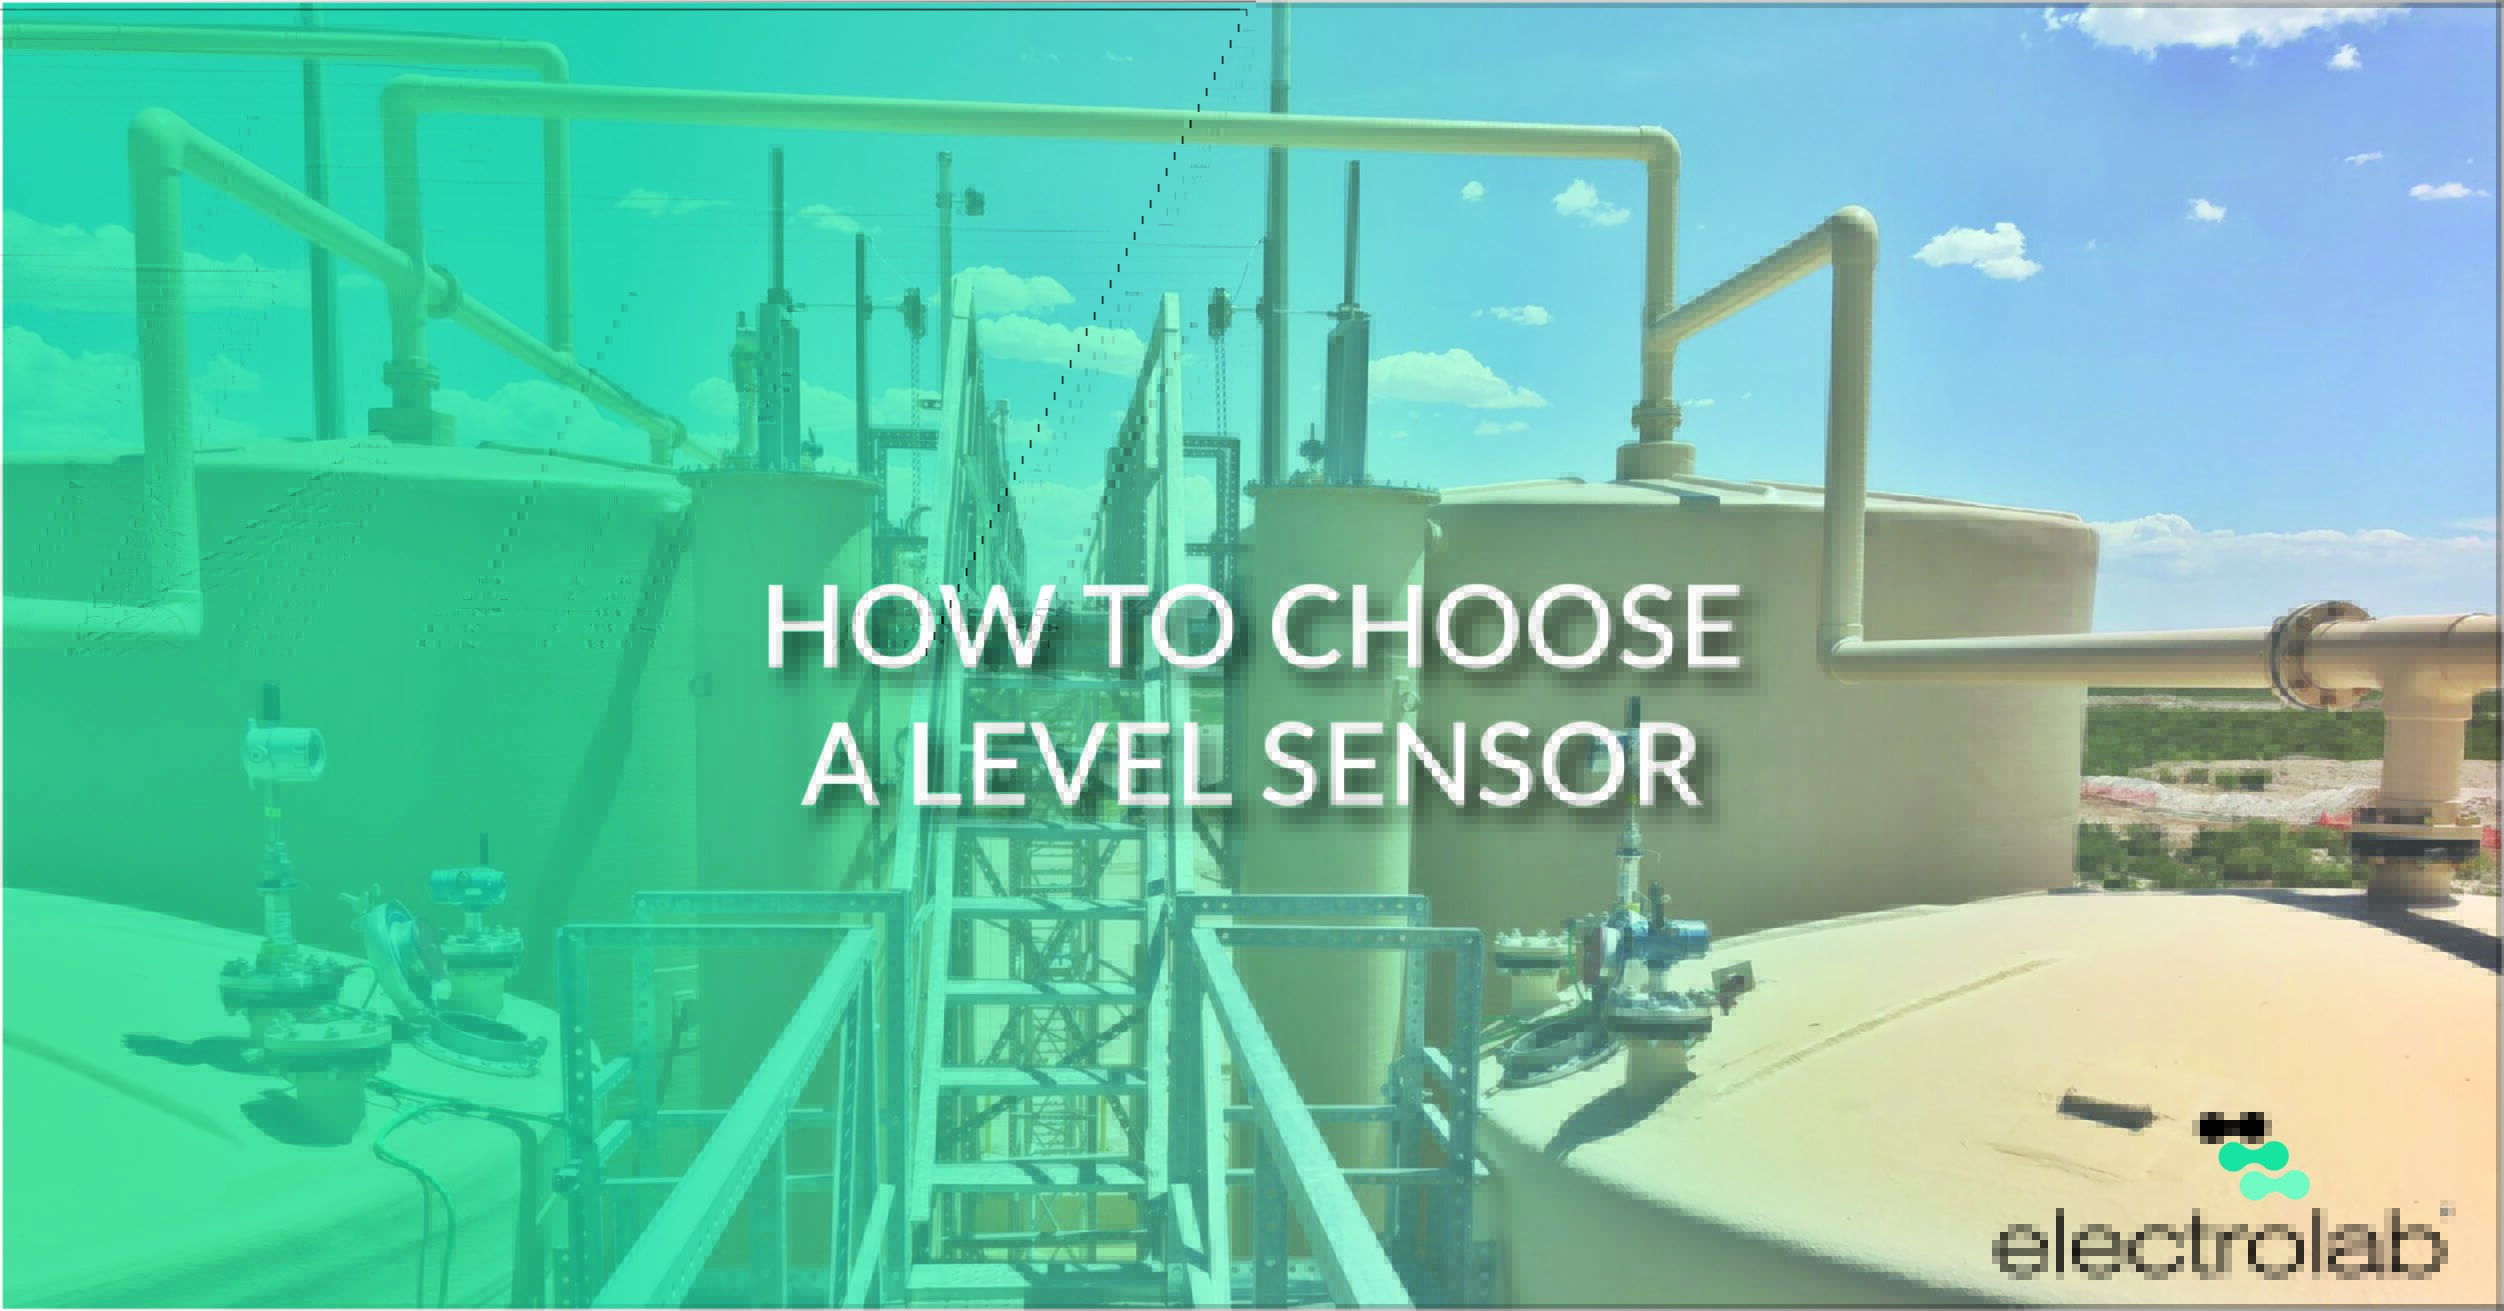 How to Choose A Level Sensor Blog Graphic with Sensors on Top of Production Tanks